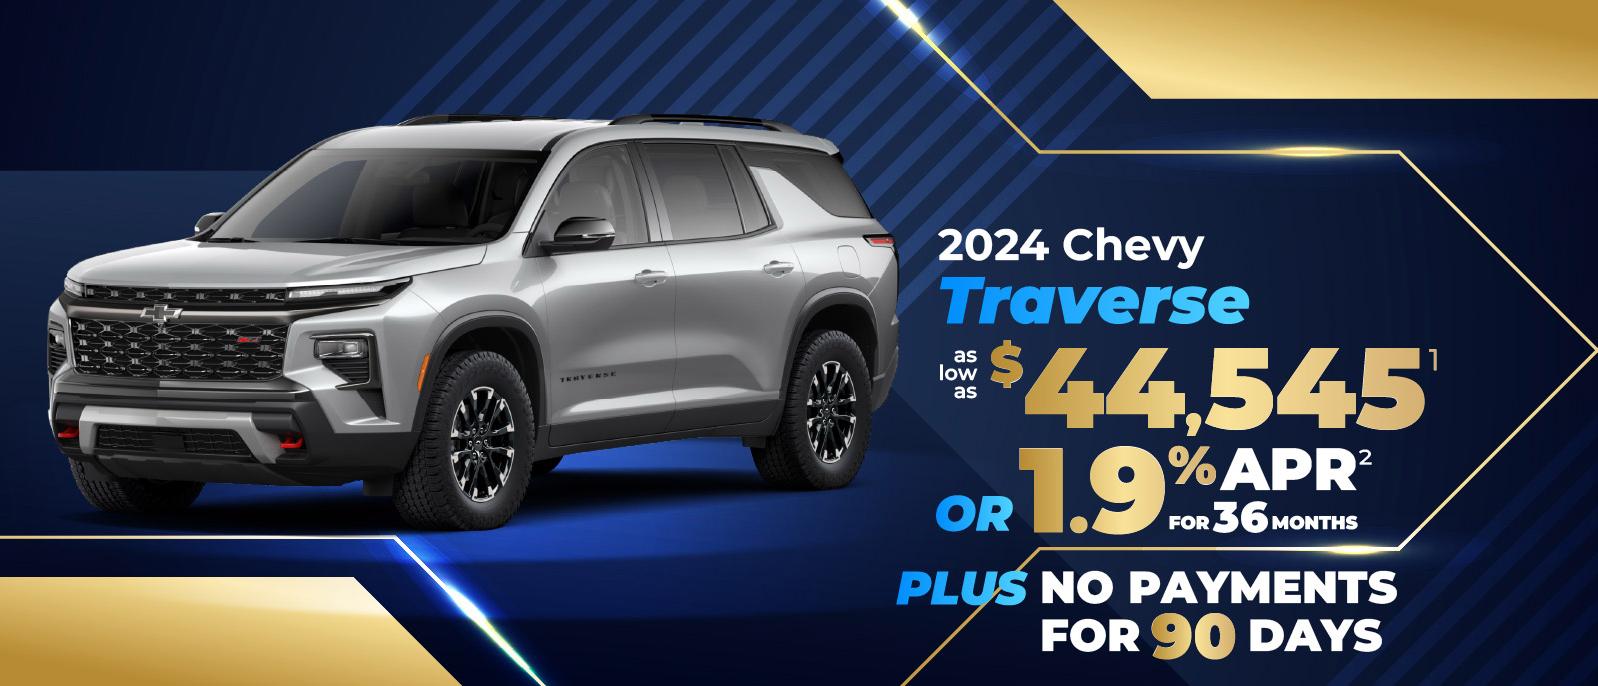 2024 Chevy Traverse - as  low as $44,545 or 1.9% APR for 36 months plus no payments for 90 days